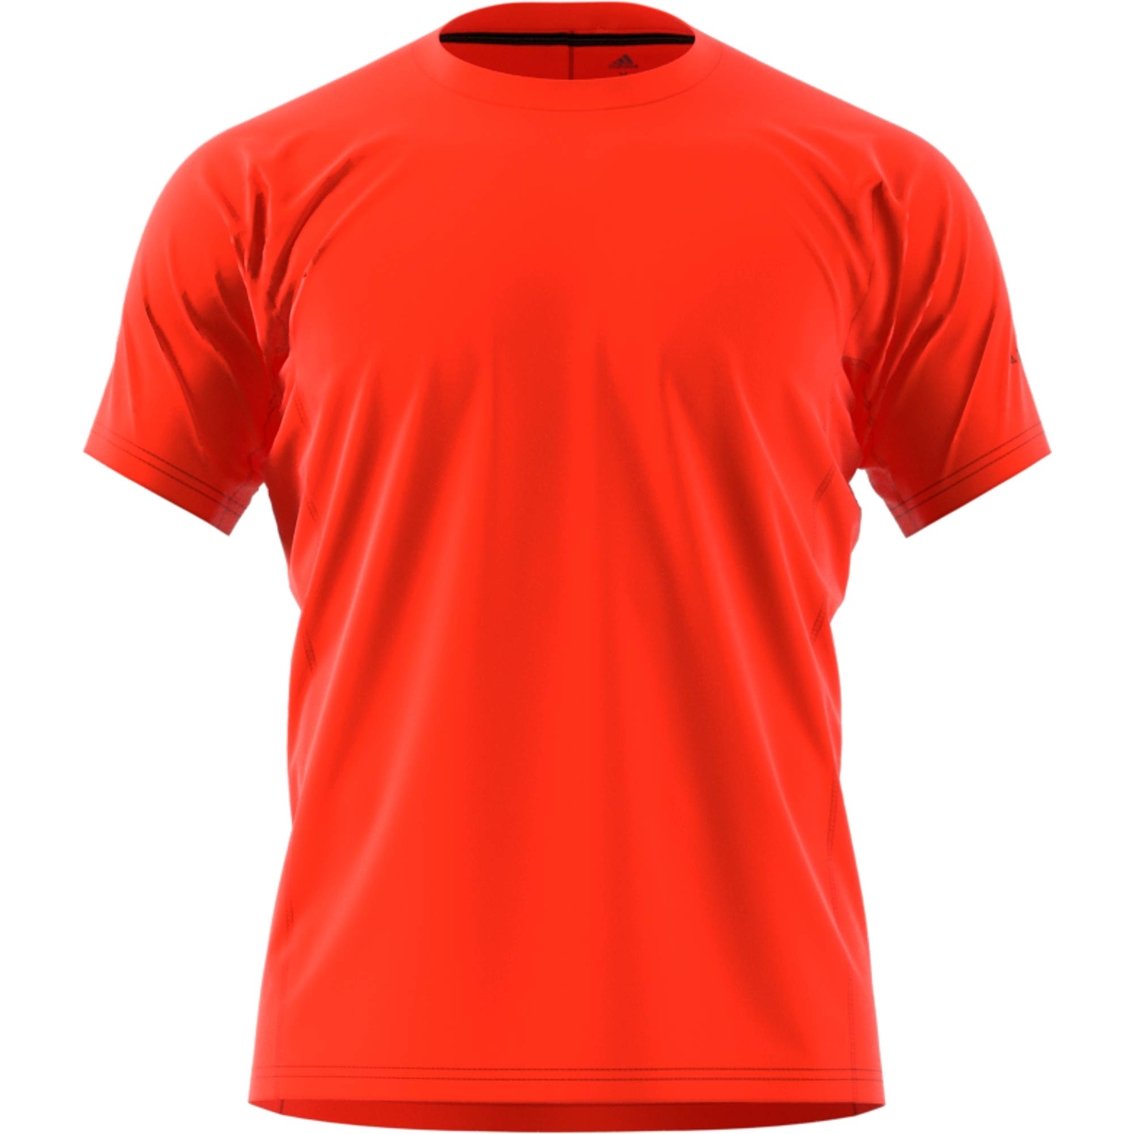 adidas Outdoor Agravic Parley Tee - Image 3 of 4